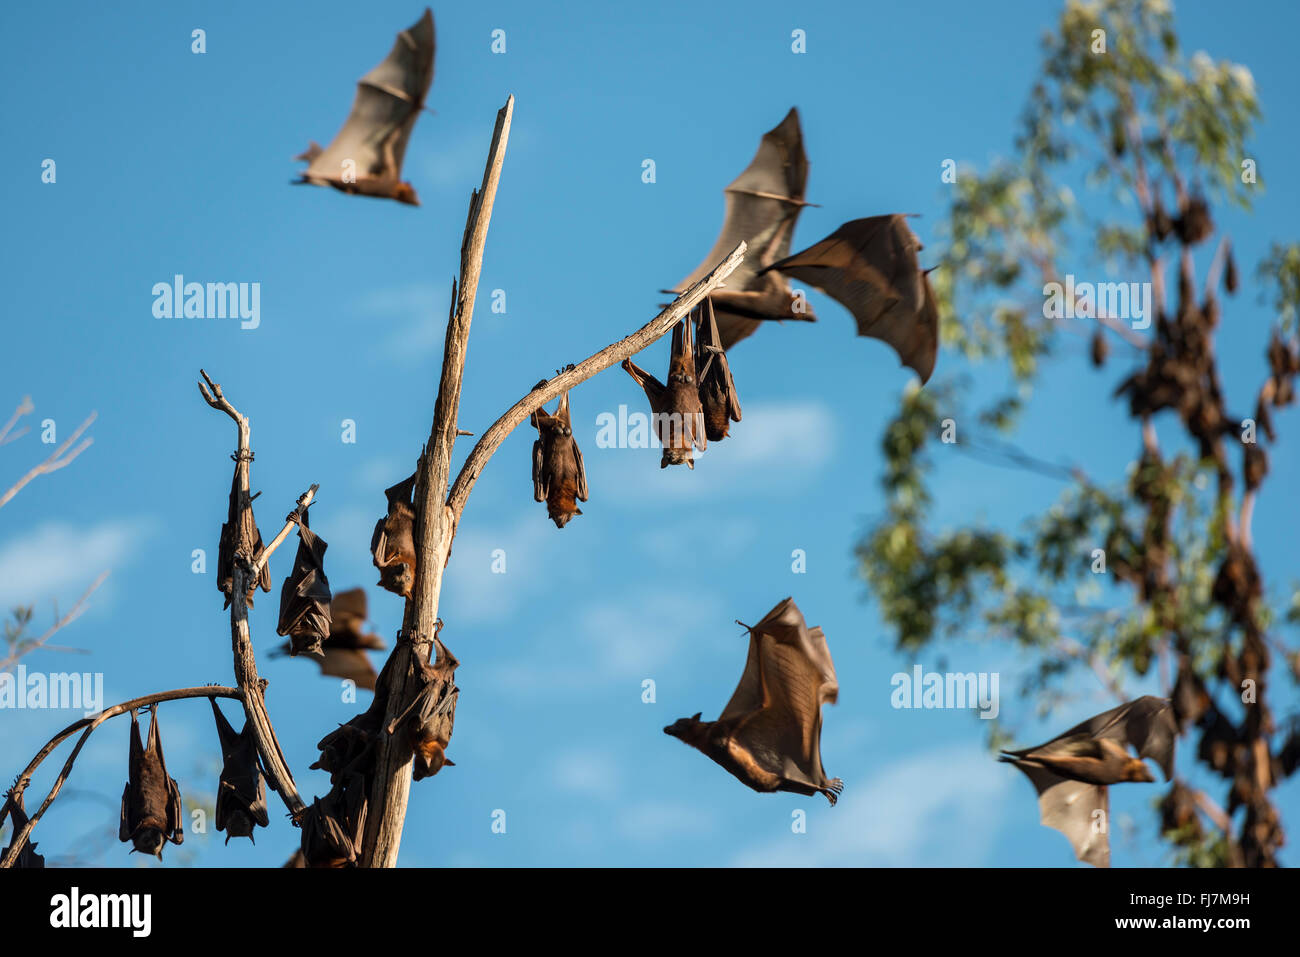 Little Red Flying-fox (Pteropus scapulatus) foxes roosting on inland white mahogany, Eucalyptus trees and easily spooked into flying.  This massive colony, estimated to peak at about 100,000 bats, took up residence along the Wild River of Heberton sometime early Dec 2013 with the mass flowering of the eucalyptus trees or Inland White Mahogany with the little reds seeking its nectar and pollen.  The Little Red Flying-fox is a species of megabat native to northern and eastern Australia. With a weight of 280–530 grams (9.9–18.7 oz) it is the smallest flying fox in mainland Australia (the others b Stock Photo